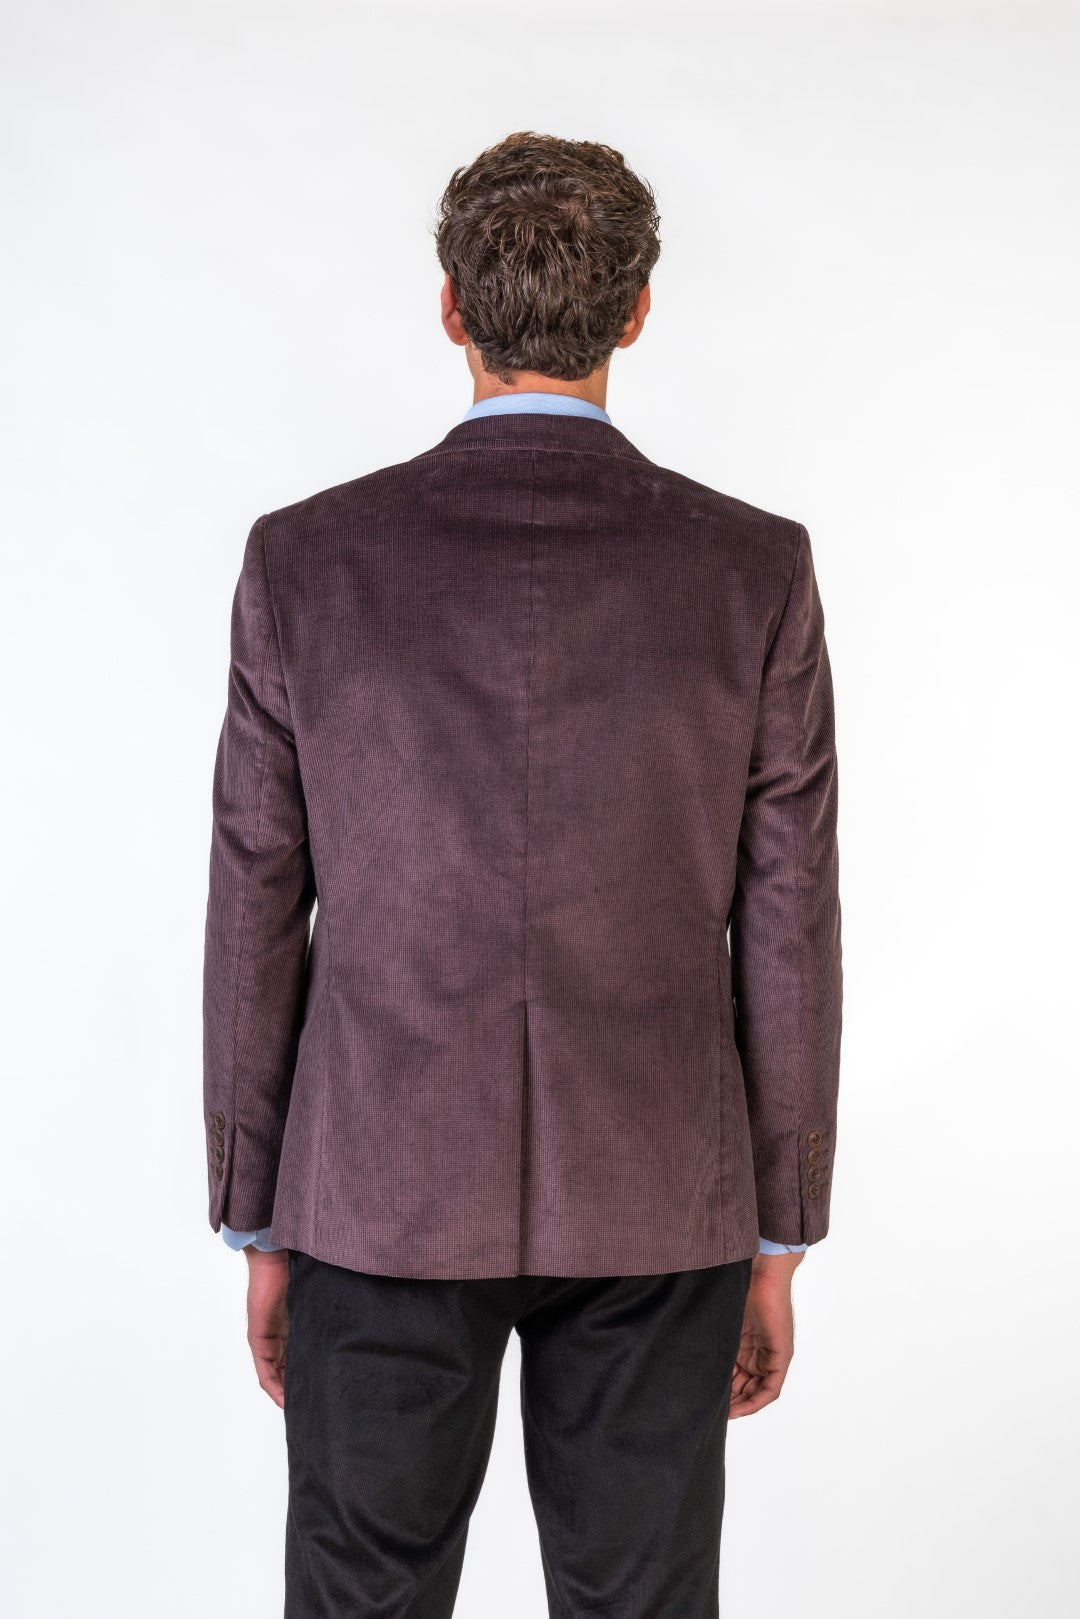 Corduroy Double Sided Pockets Blazer With Floral Lining